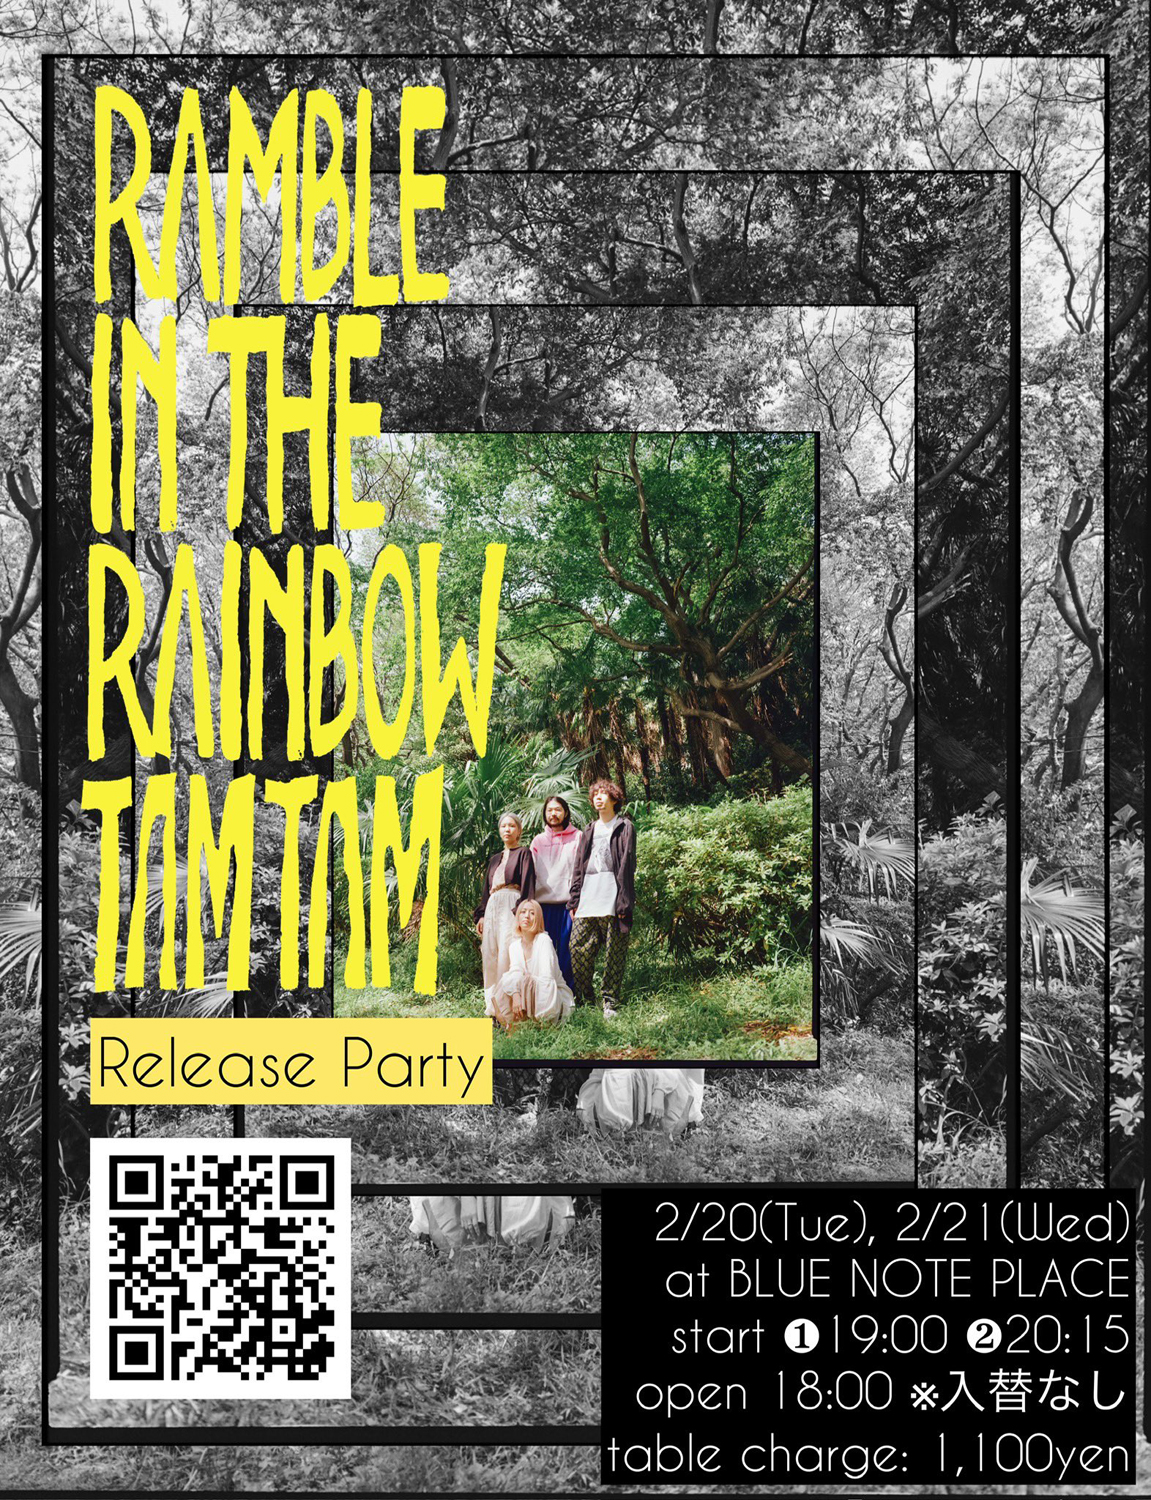 TAMTAM "Ramble In The Rainbow" Release Party